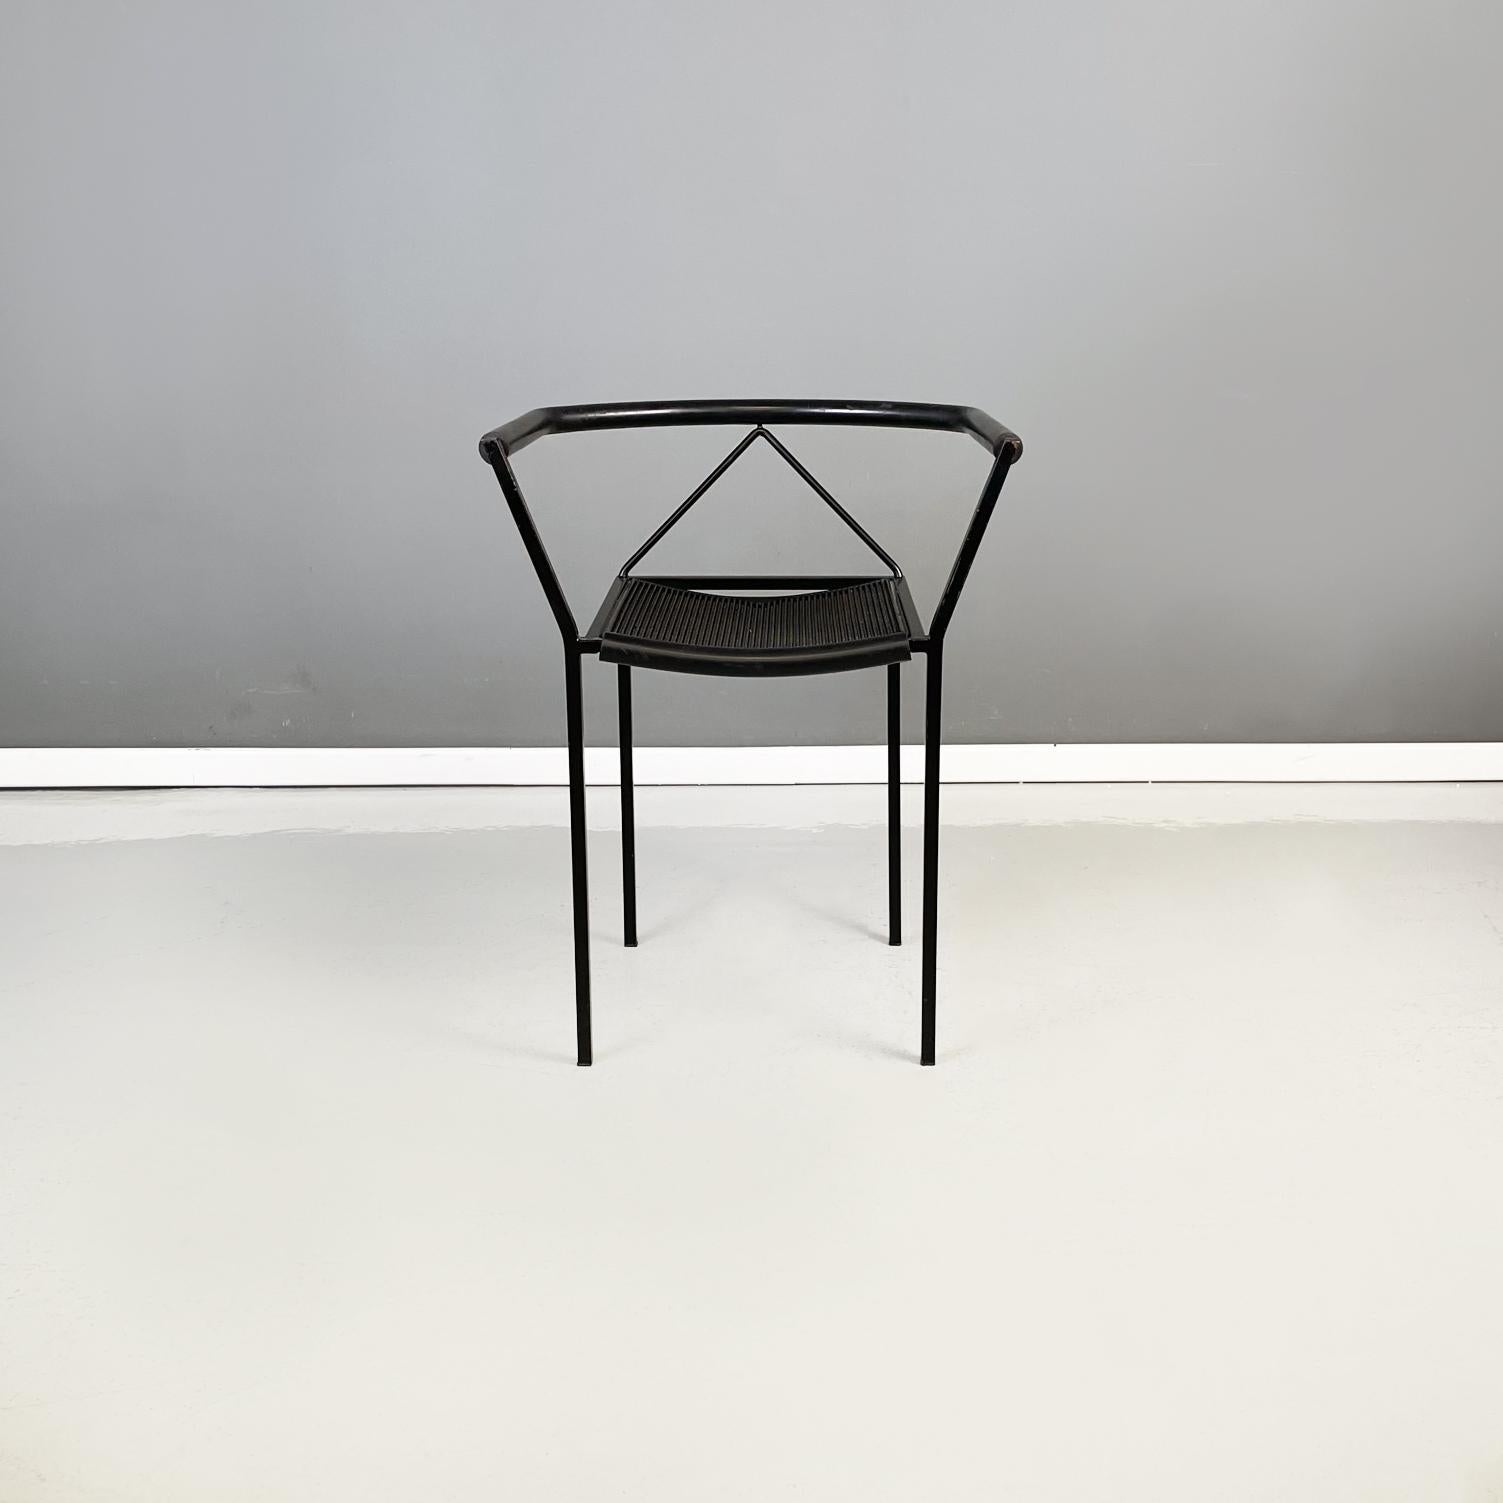 Italian modern Black metal and rubber Chair Poltroncina by Maurizio Peregalli for Zeus, 1990s
Chair mod. Poltroncina with square seat in textured black rubber. The structure has a square section in matt black painted steel. The chair has backrest